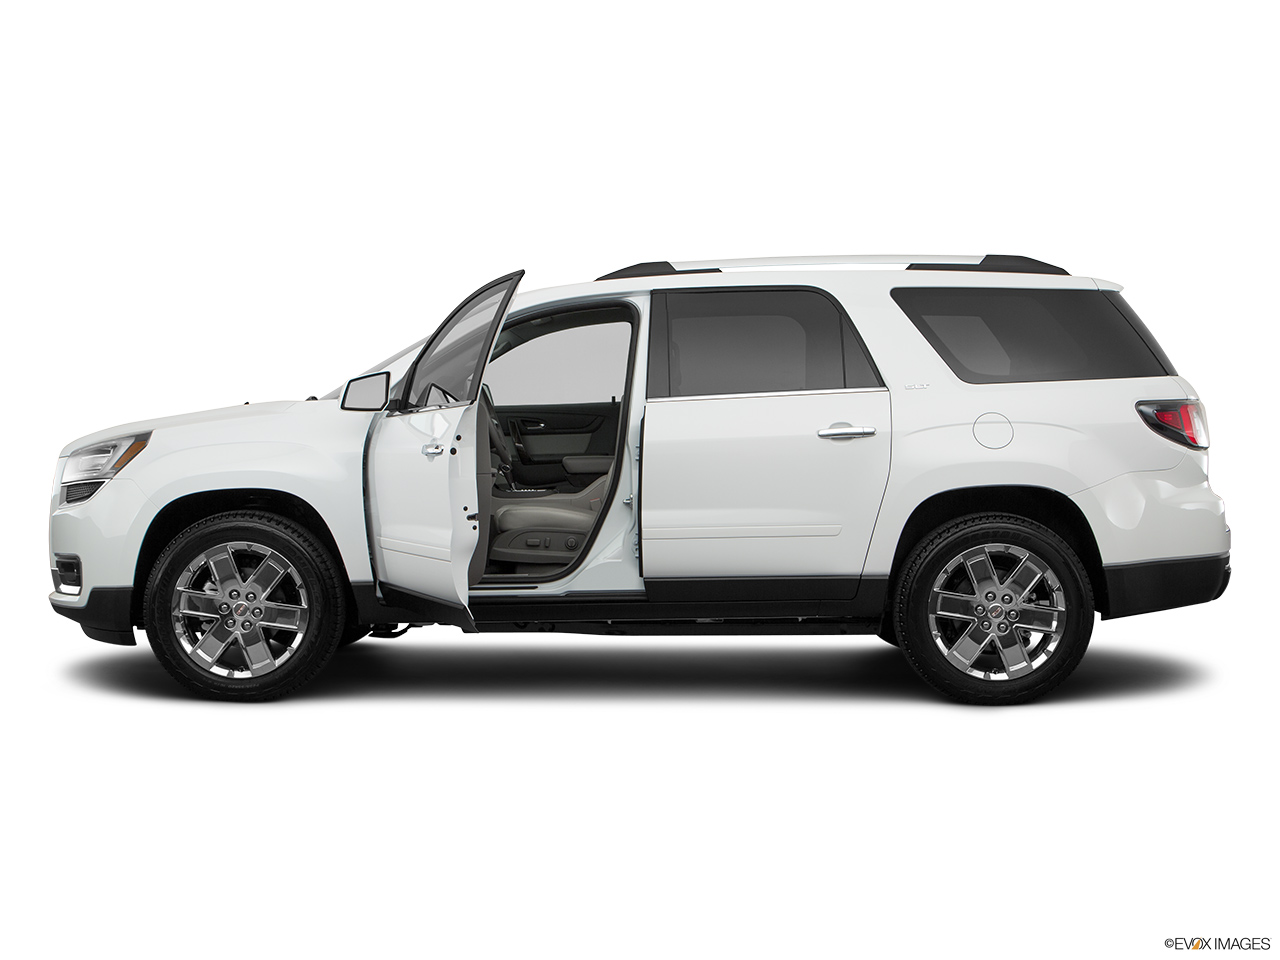 2017 GMC Acadia Limited SLT Driver's side profile with drivers side door open. 